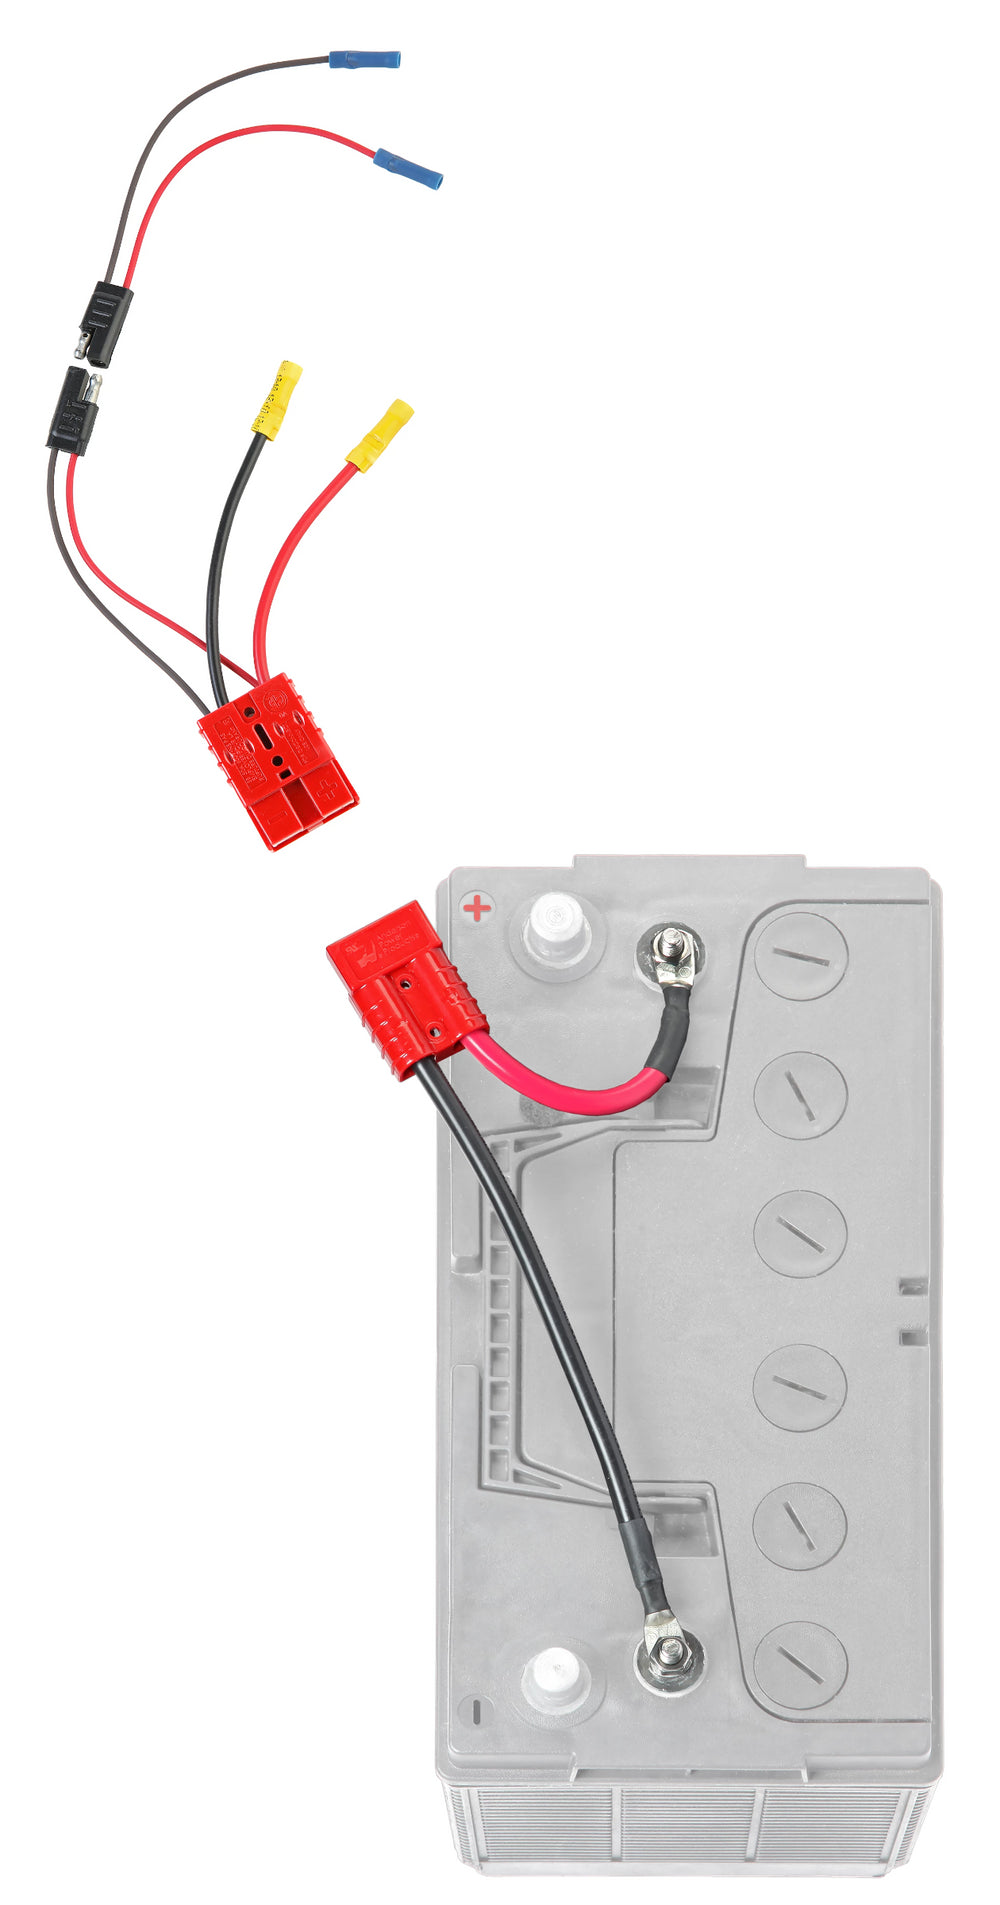 Solar Panel Connection CE12VB1WS - Connect-Ease. Connect all your marine equipment with ease.